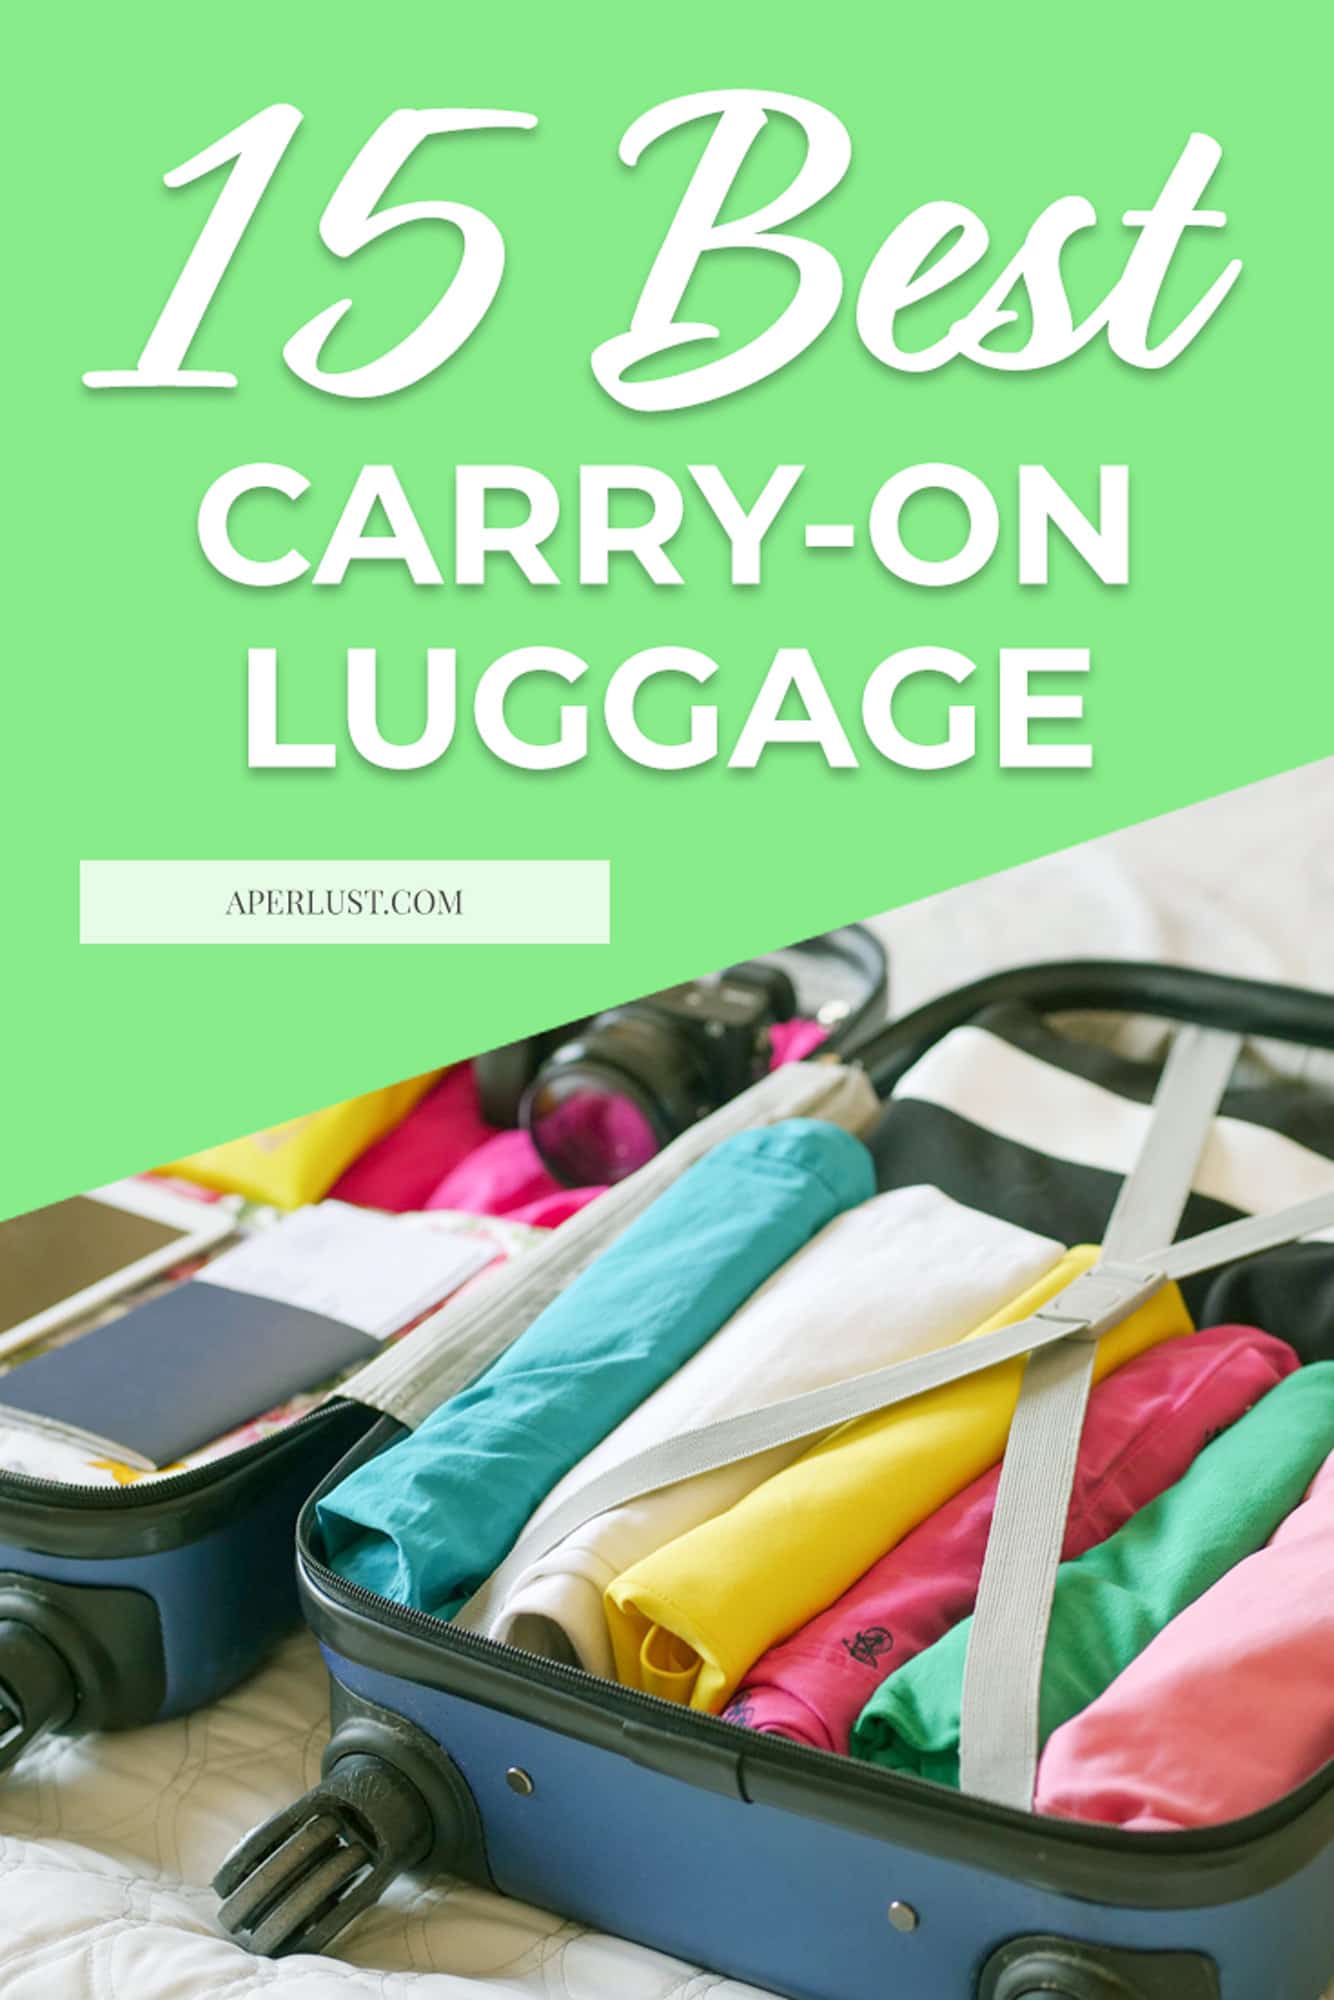 15 best carry-on luggage Pinterest Pin